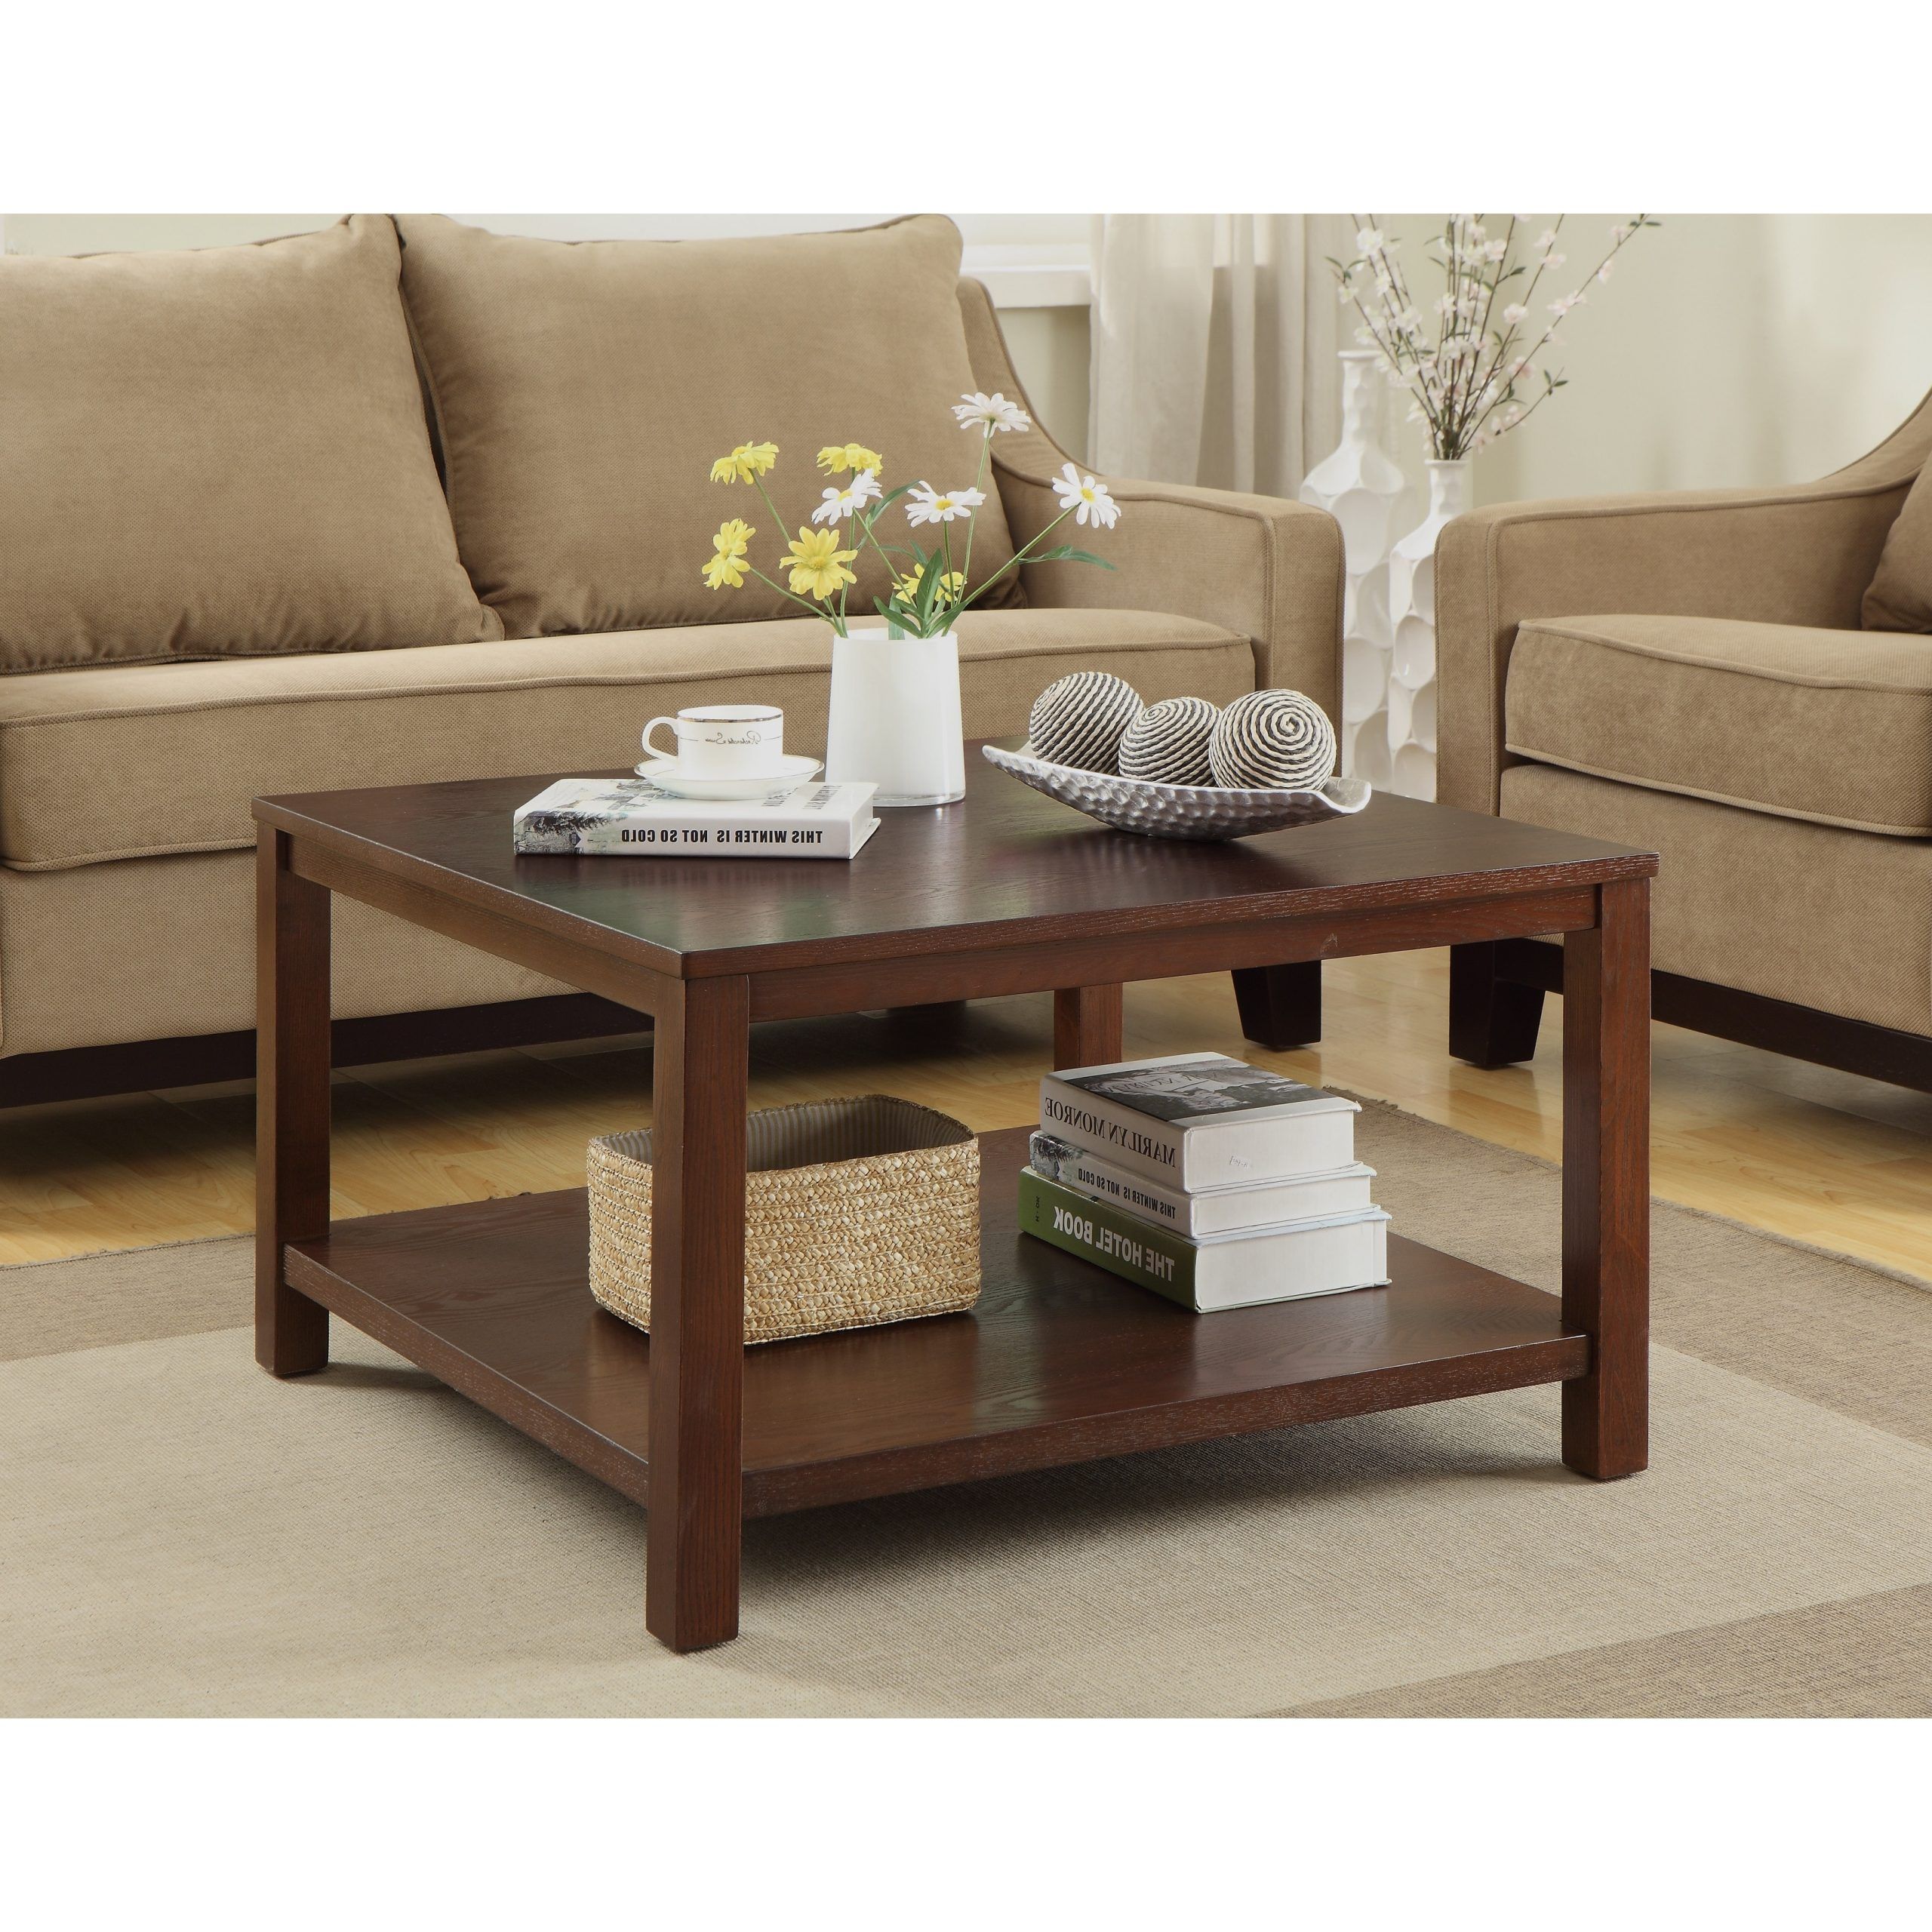 Square Coffee Table With Dual Shelves Solid Wood Legs & Wood | Ebay For Coffee Tables With Solid Legs (Gallery 10 of 20)